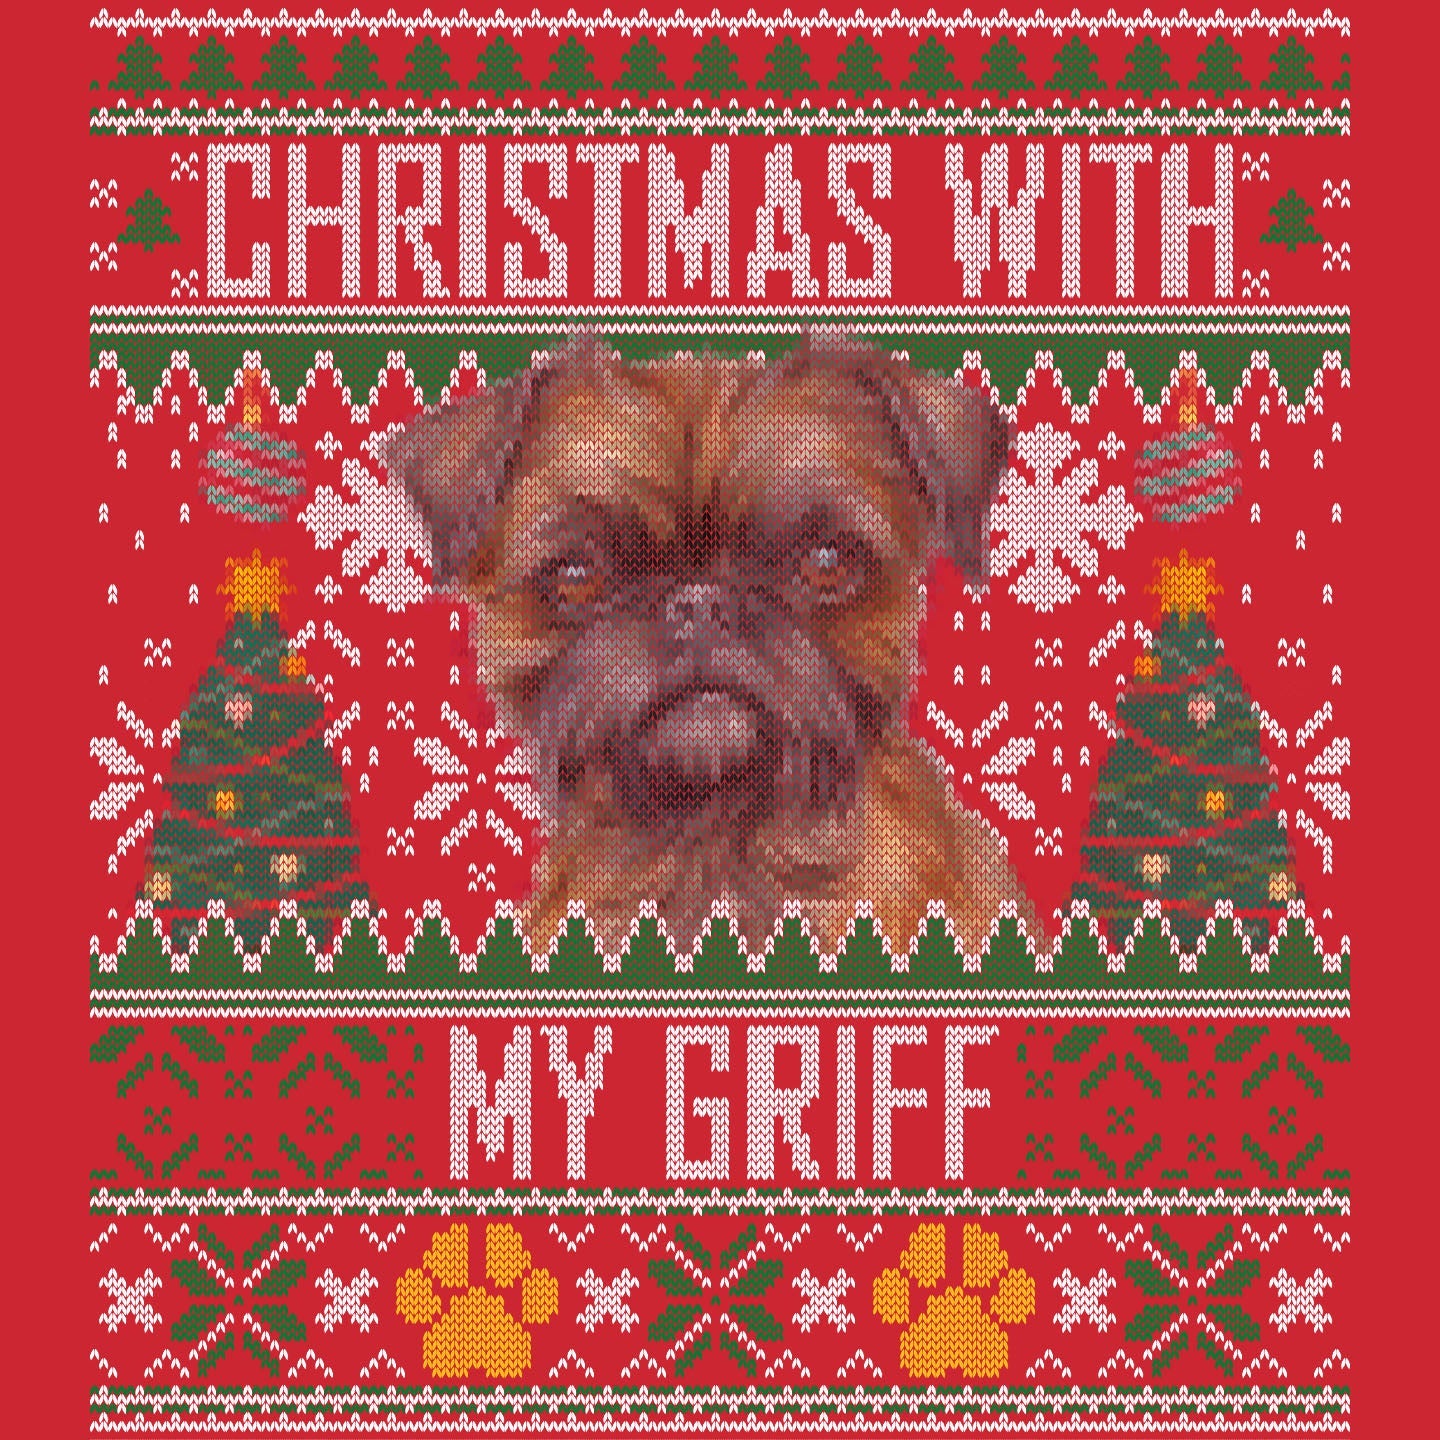 Ugly Sweater Christmas with My Brussels Griffon - Adult Unisex Long Sleeve T-Shirt